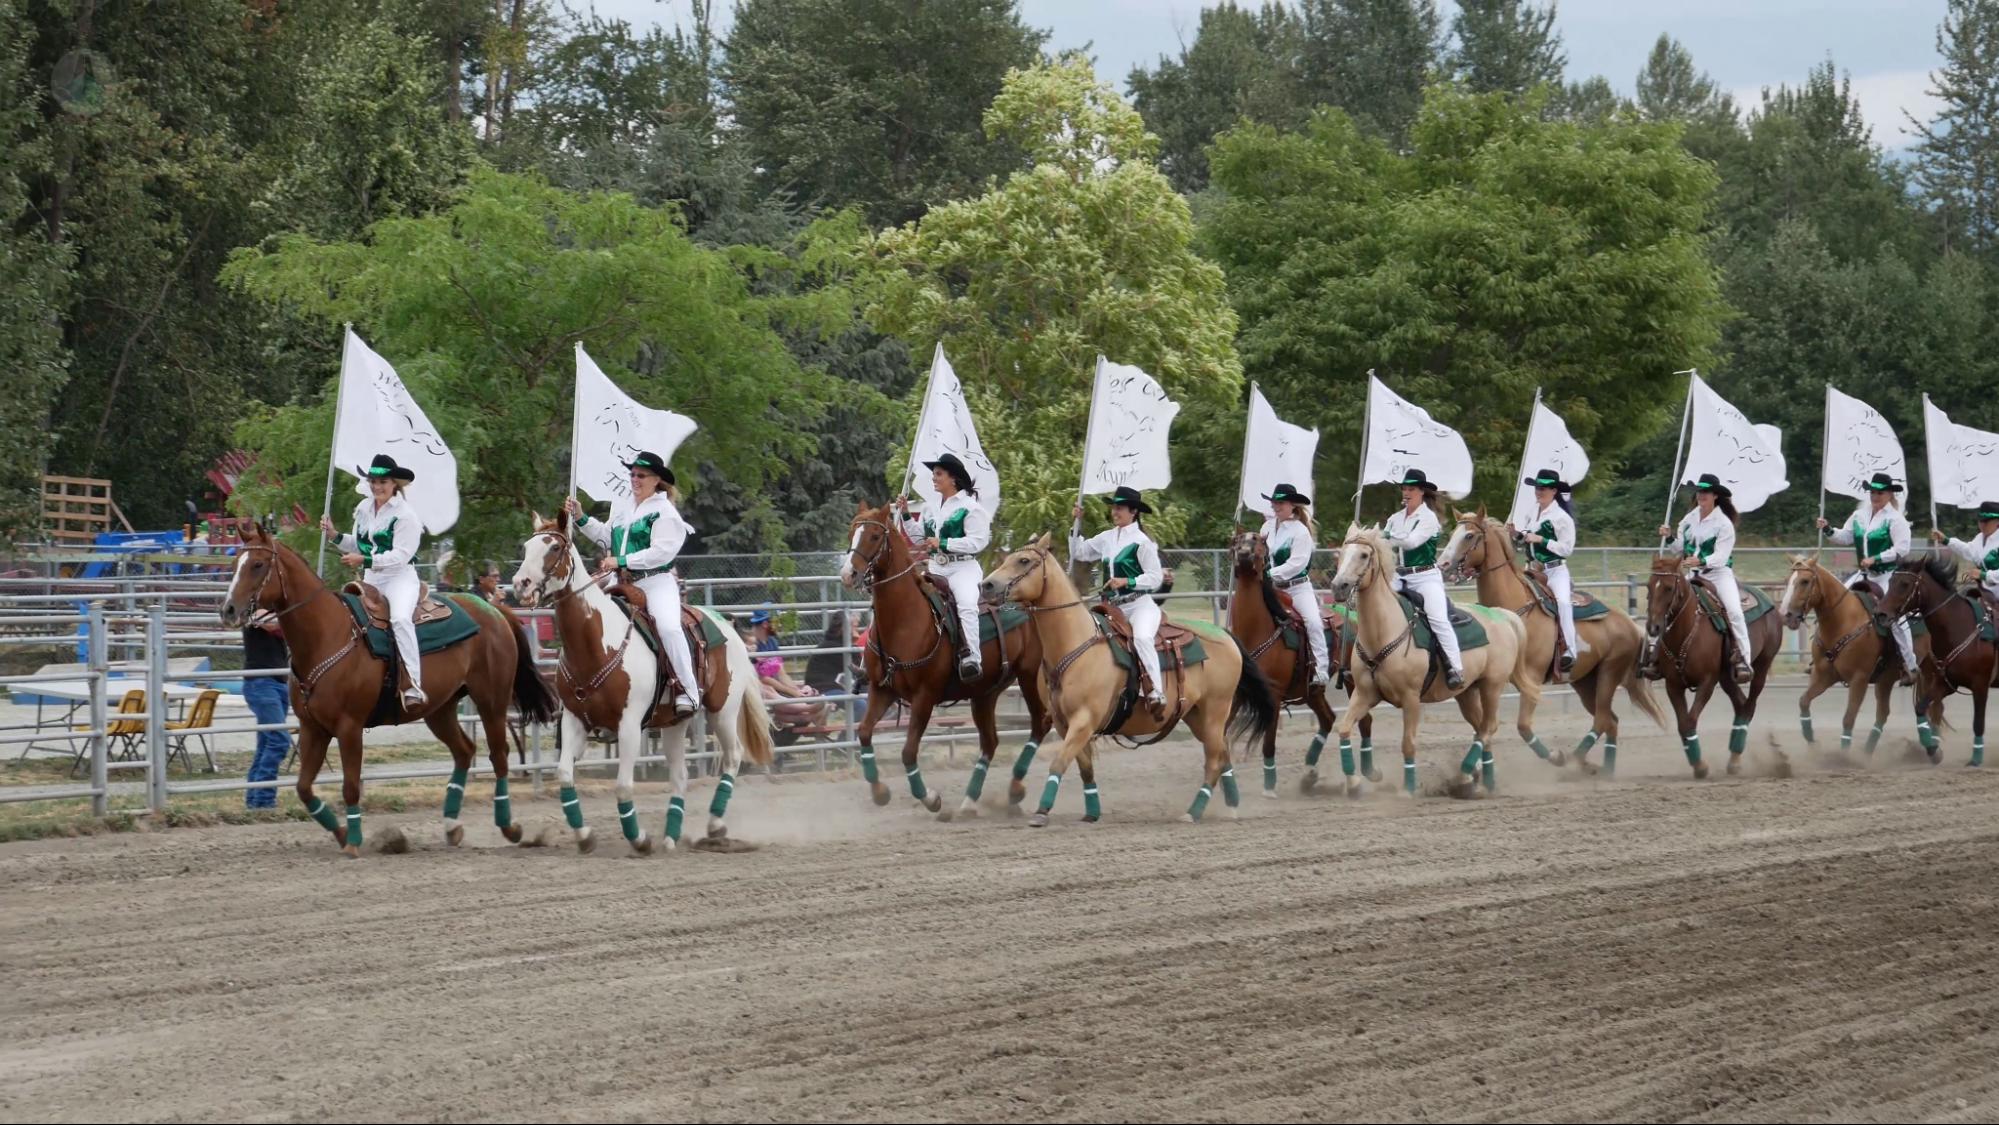 The musical ride to kickoff the rodeo at the Chilliwack Fair 2021